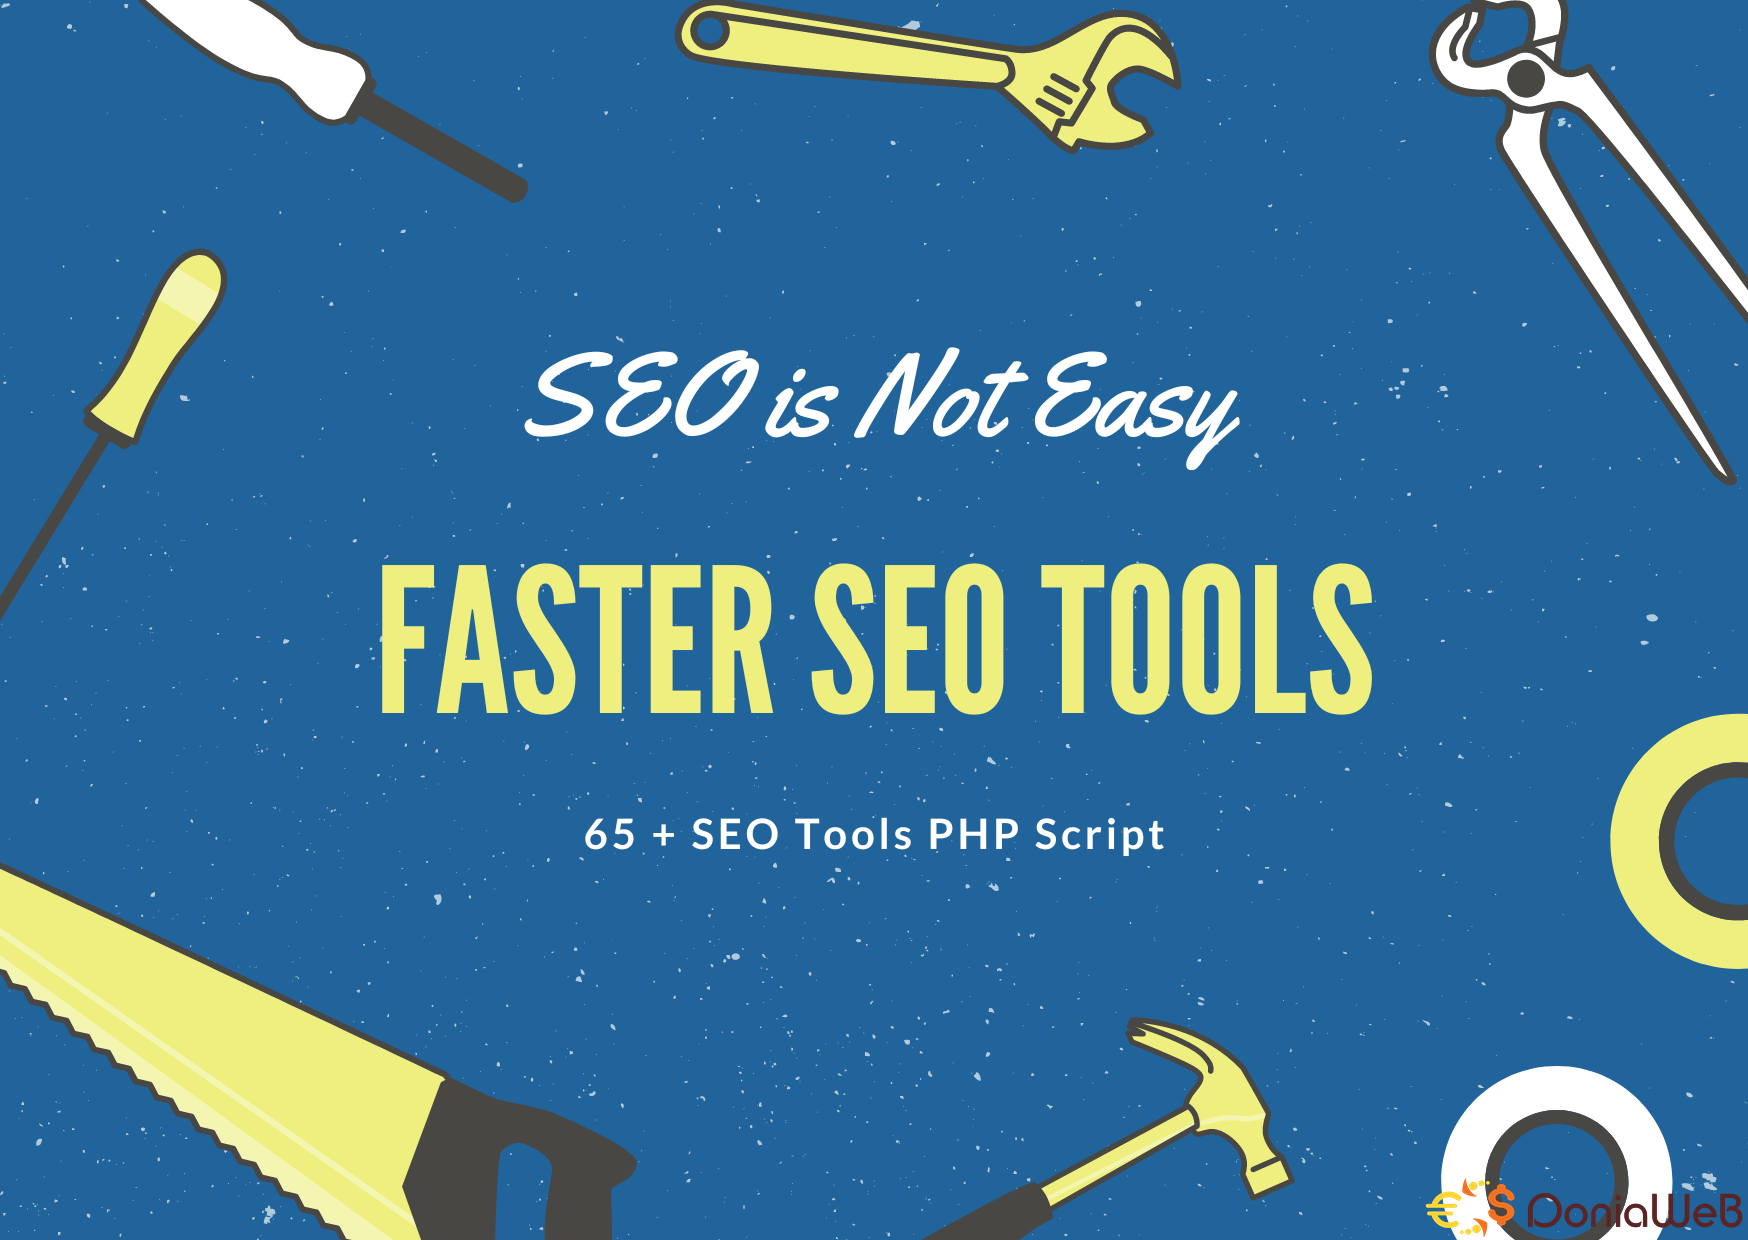 Faster SEO Tools - SEO is Not Easy PHP Script